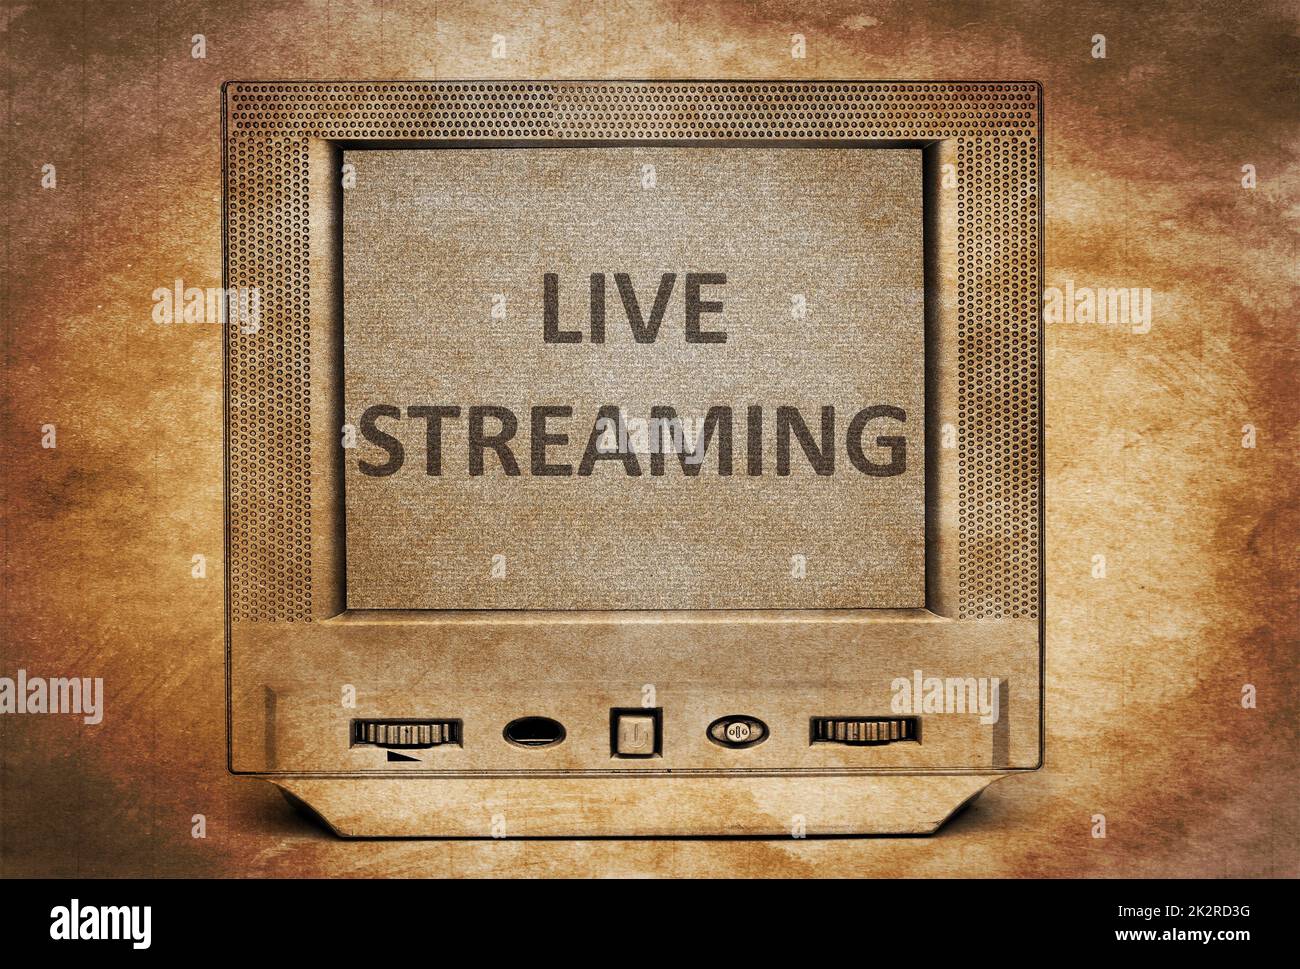 Live streaming  sign on vintage TV Stock Photo